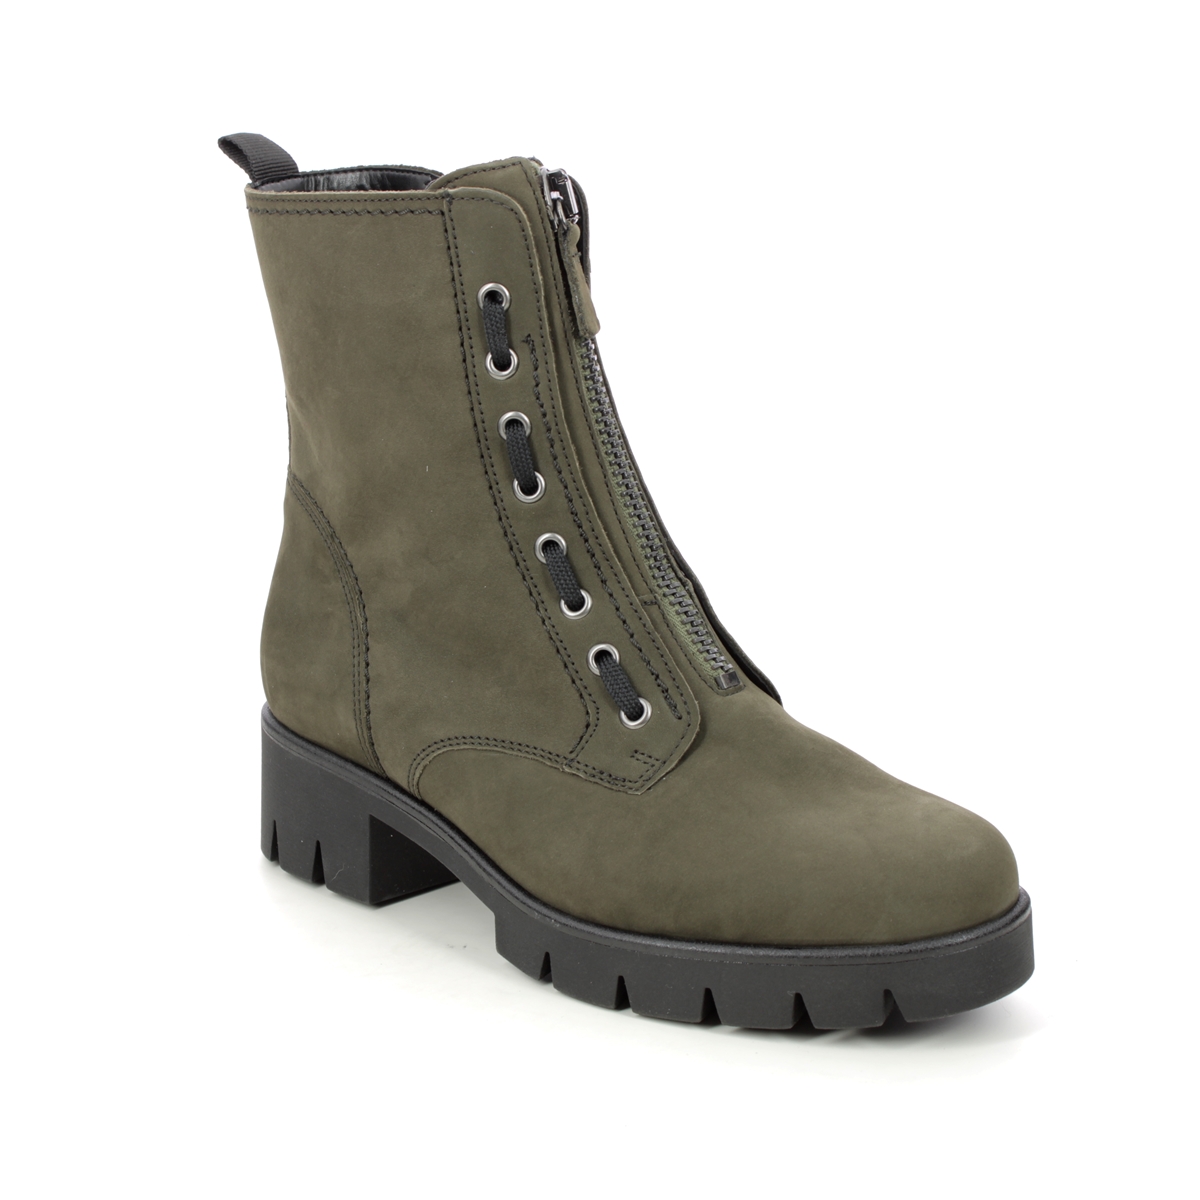 Gabor Banter Olive nubuck Womens Biker Boots 31.716.39 in a Plain Leather in Size 7